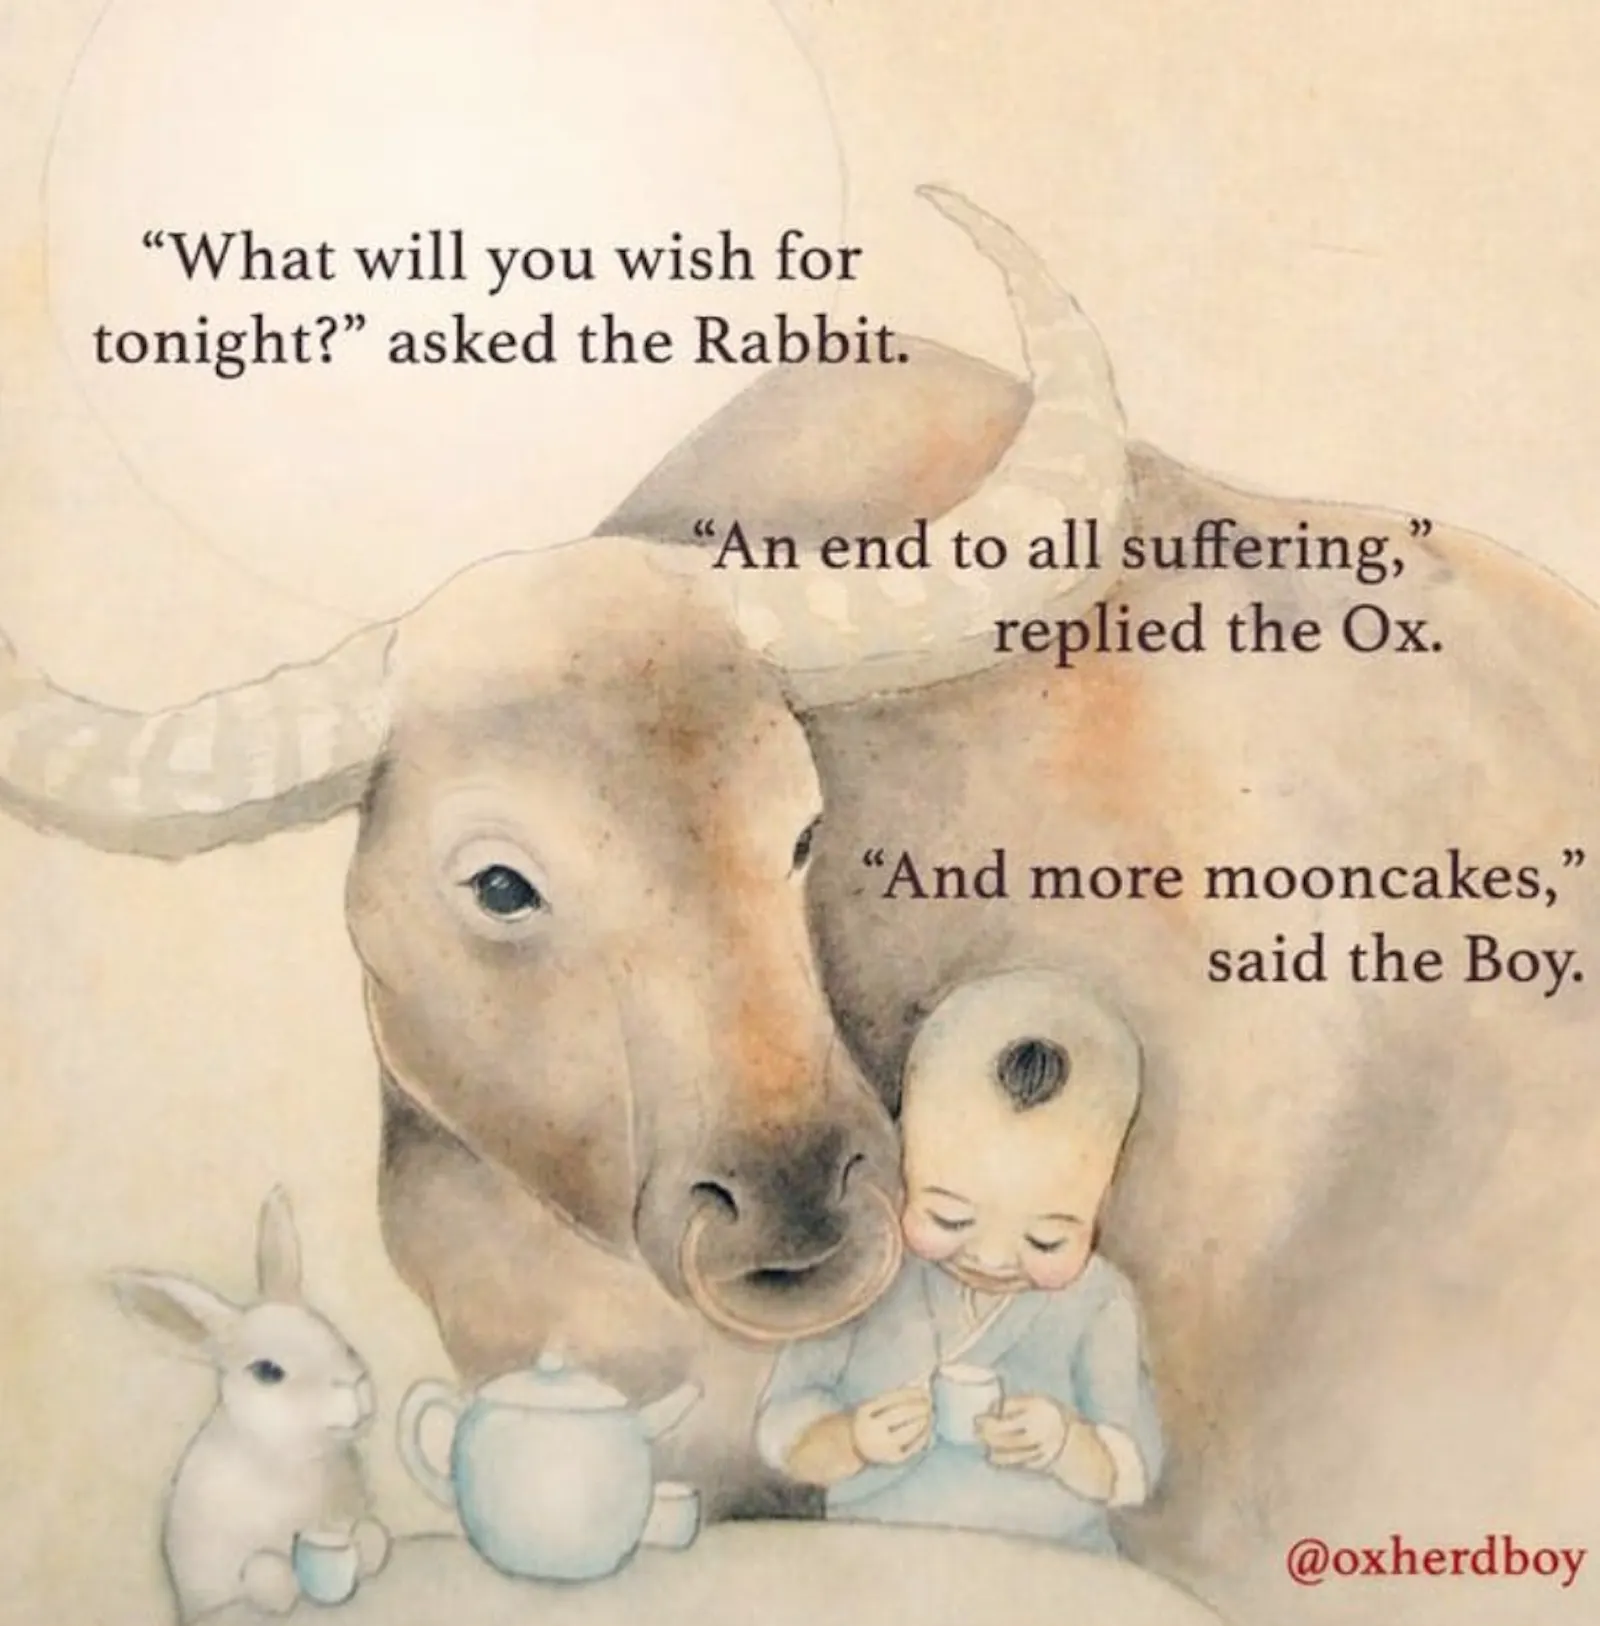 A rabbit, ox and boy gather around a table drinking tea and say: "What will you wish for tonight?" asked the Rabbit. 
"An end to all suffering," replied the Ox.
"And more mooncakes," said the Boy.